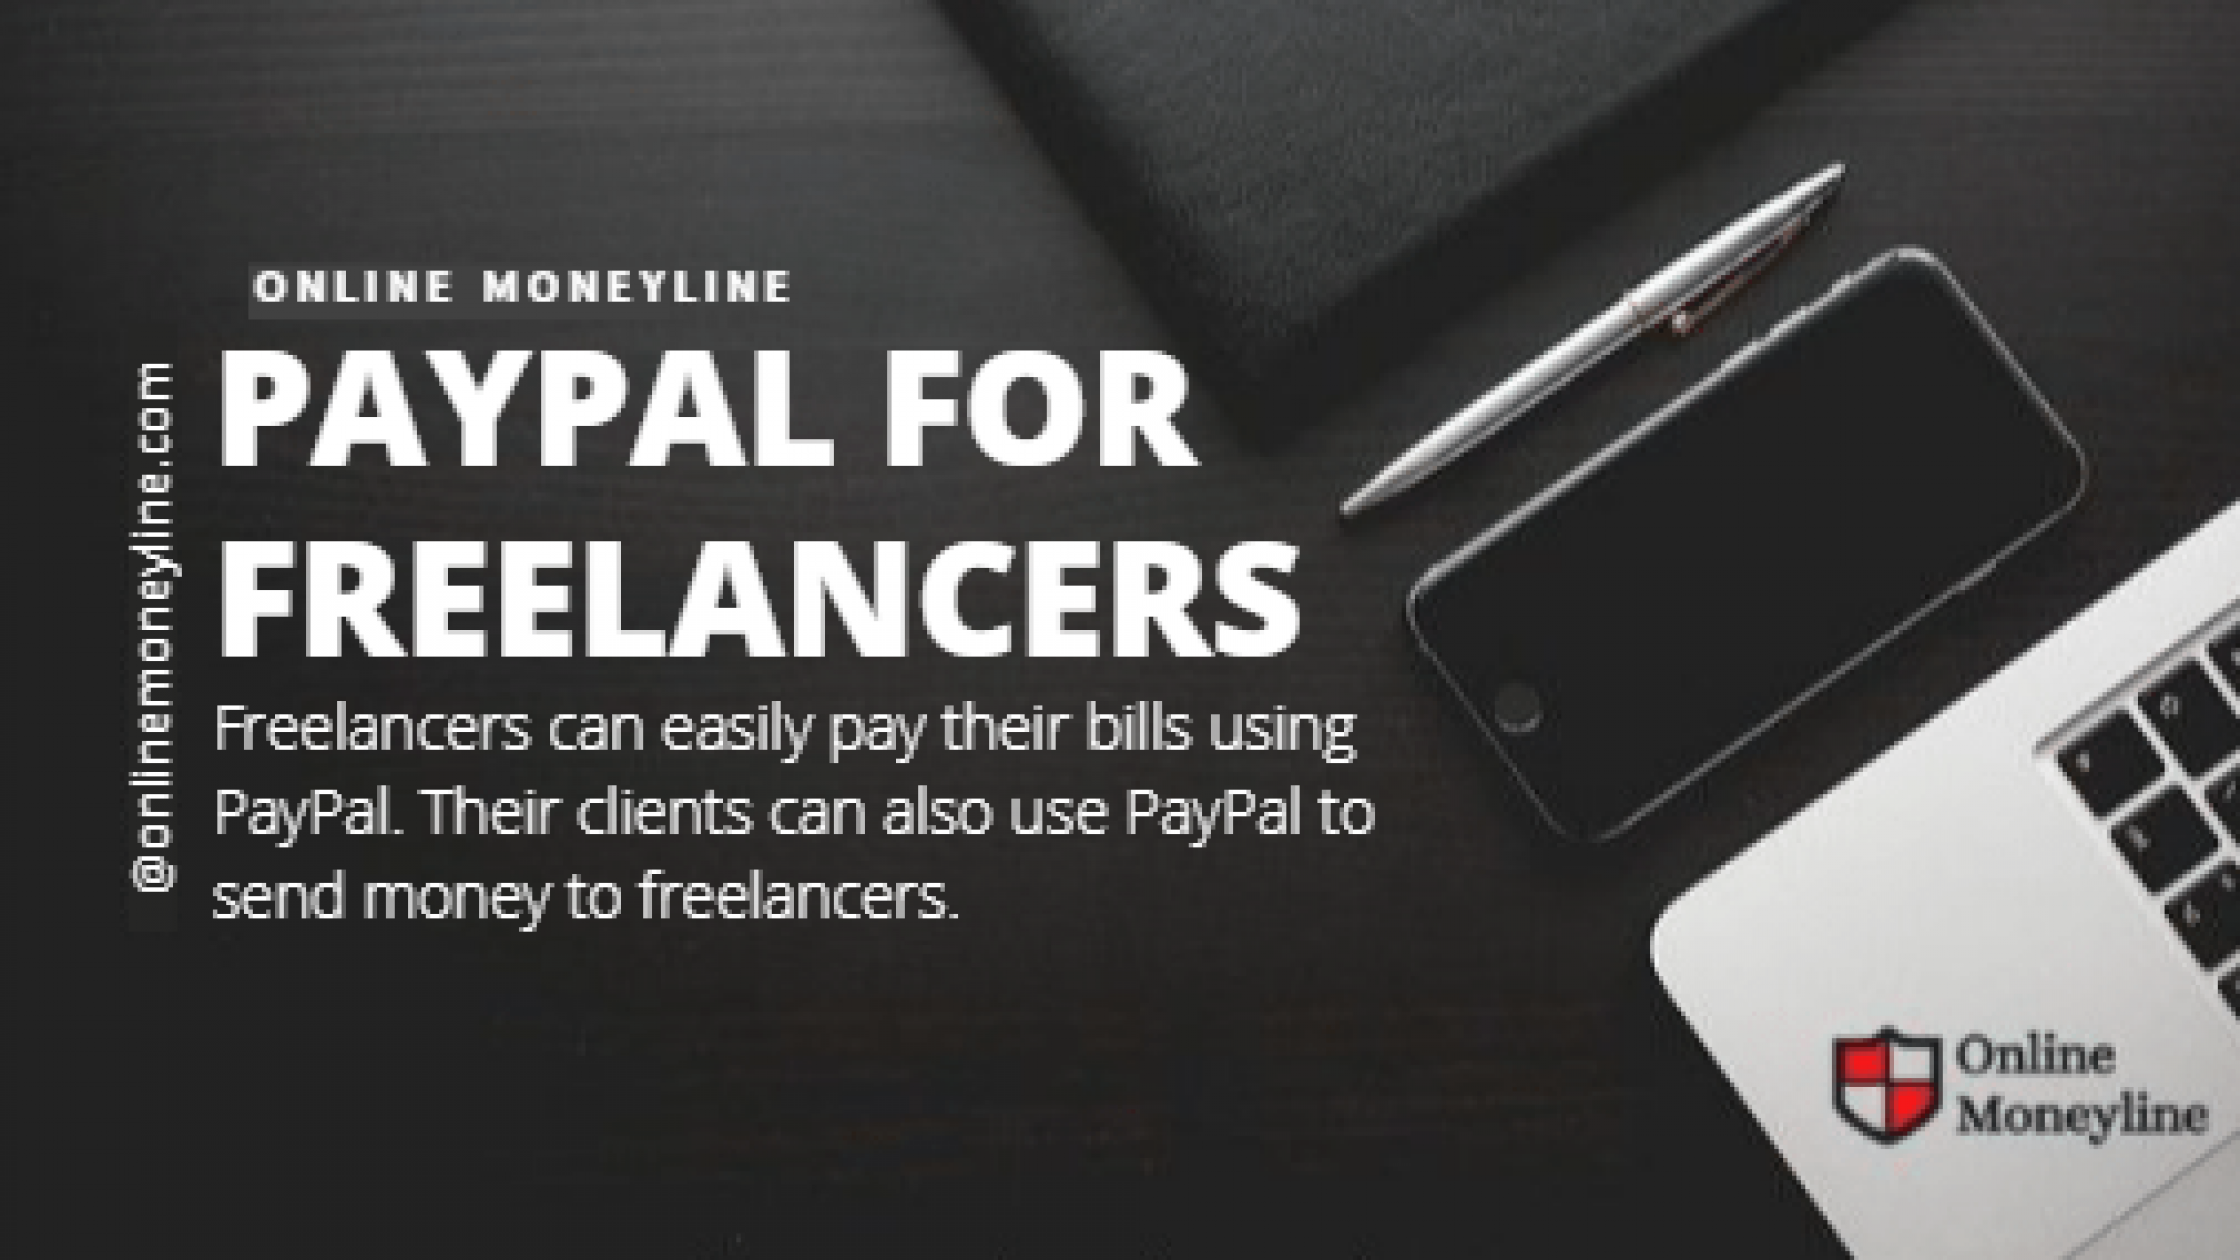 Paypal For Freelancers